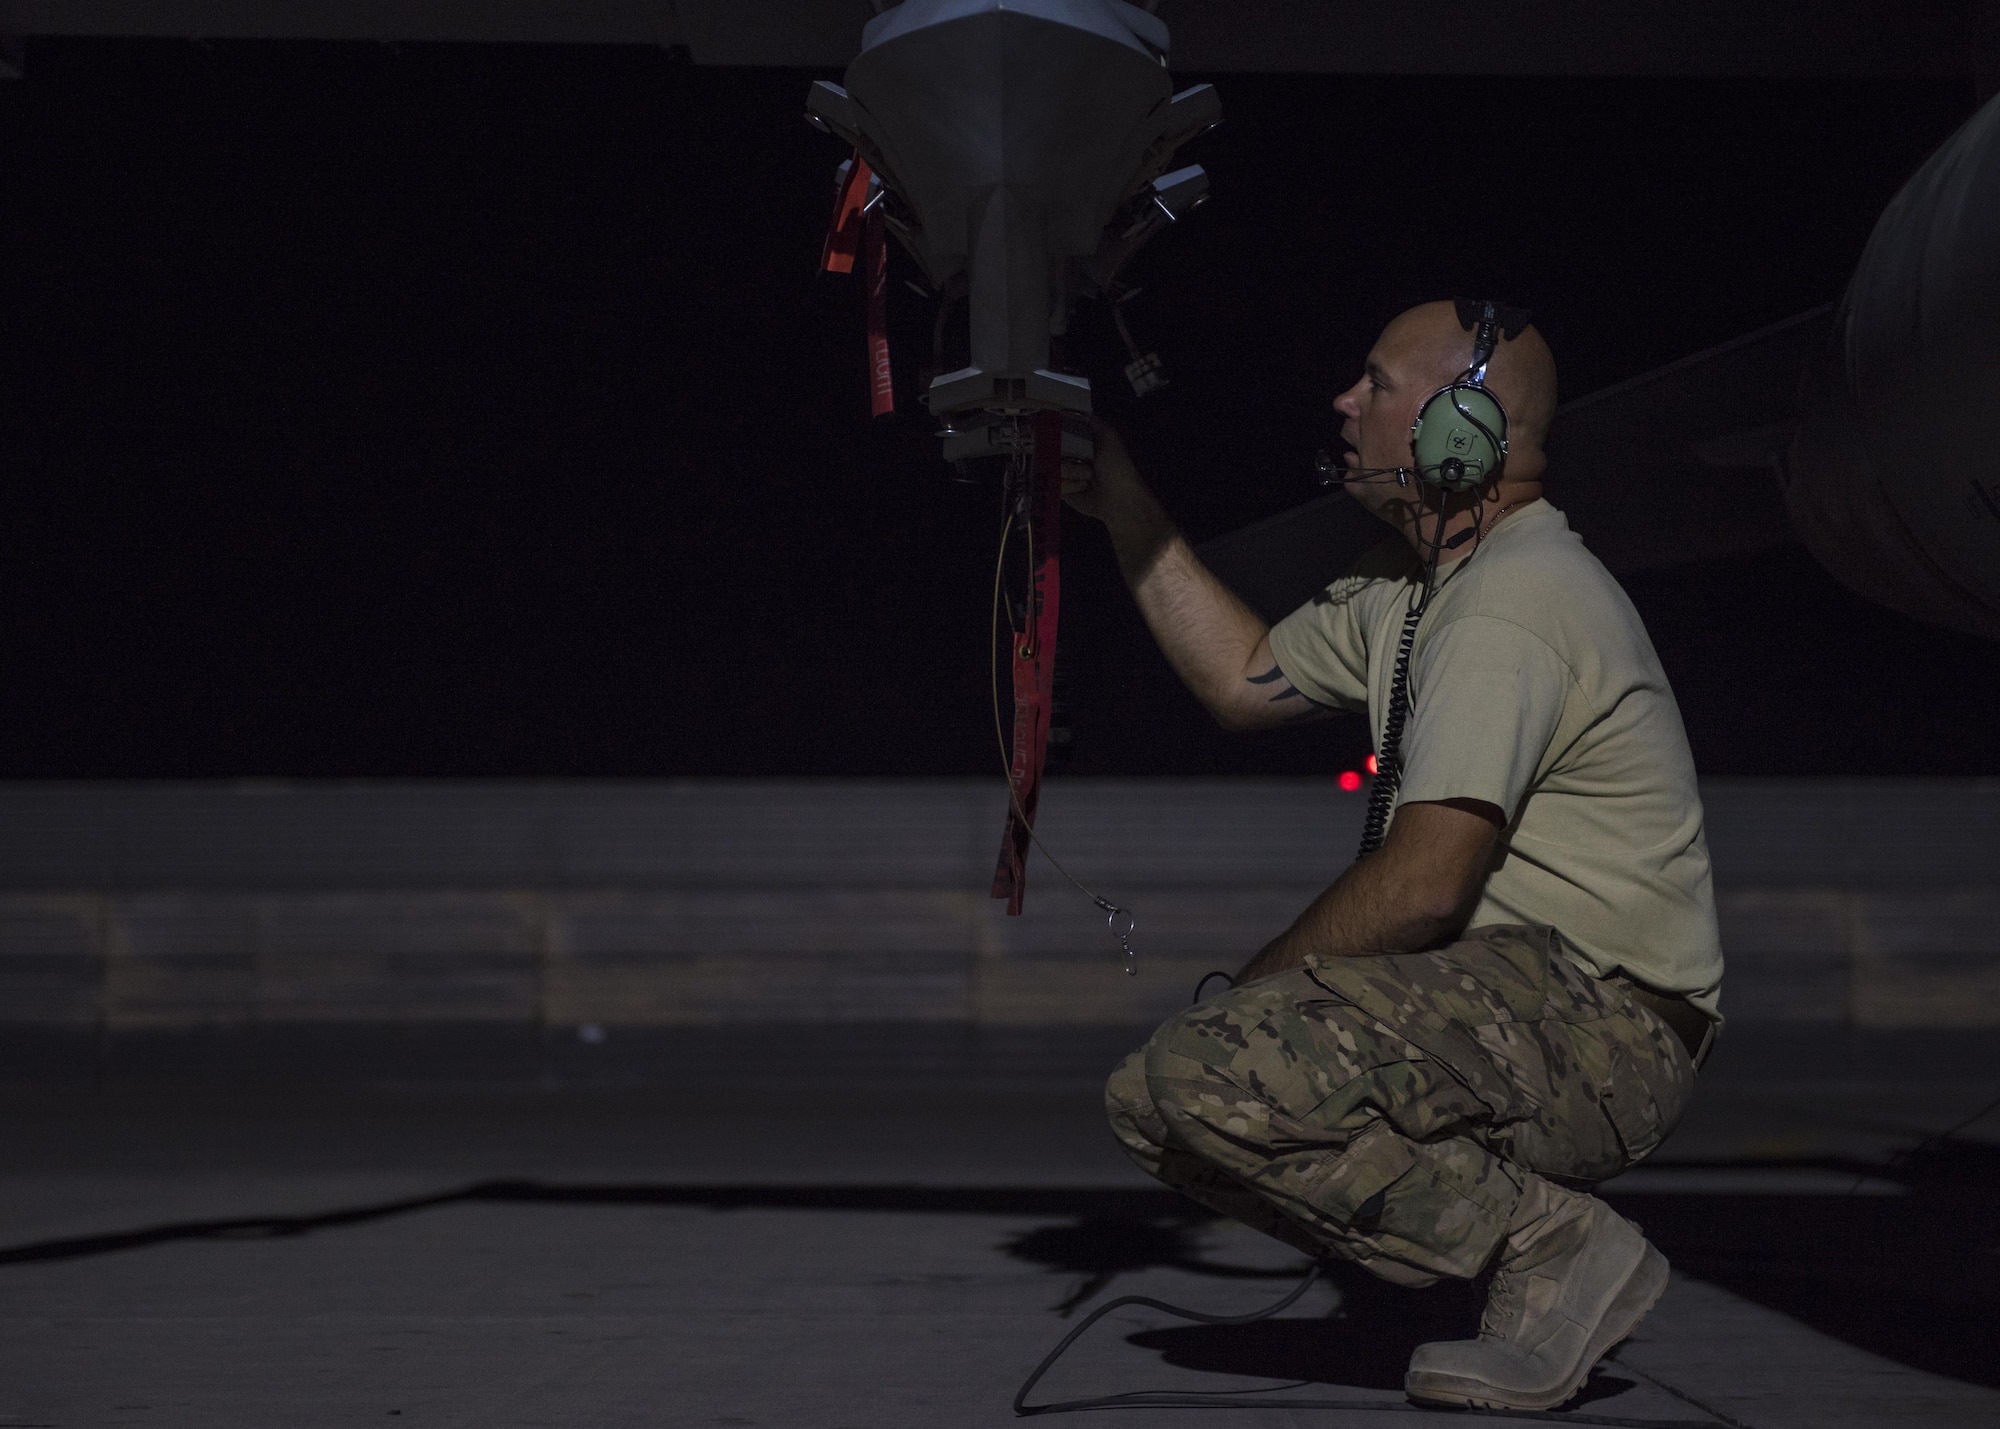 Master Sgt. Donnie Miller, 455th Expeditionary Aircraft Maintenance Squadron weapons armament systems technician, completes an ejector rack function check, Bagram Airfield, Afghanistan, Aug. 9, 2016. Triple ejector racks are used to house weapon devices on the F-16C Fighting Falcon. Weapons system technician are responsible for maintaining launch and release devices and ensure explosive devices can be accurately delivered from aircraft. (U.S. Air Force photo by Senior Airman Justyn M. Freeman)